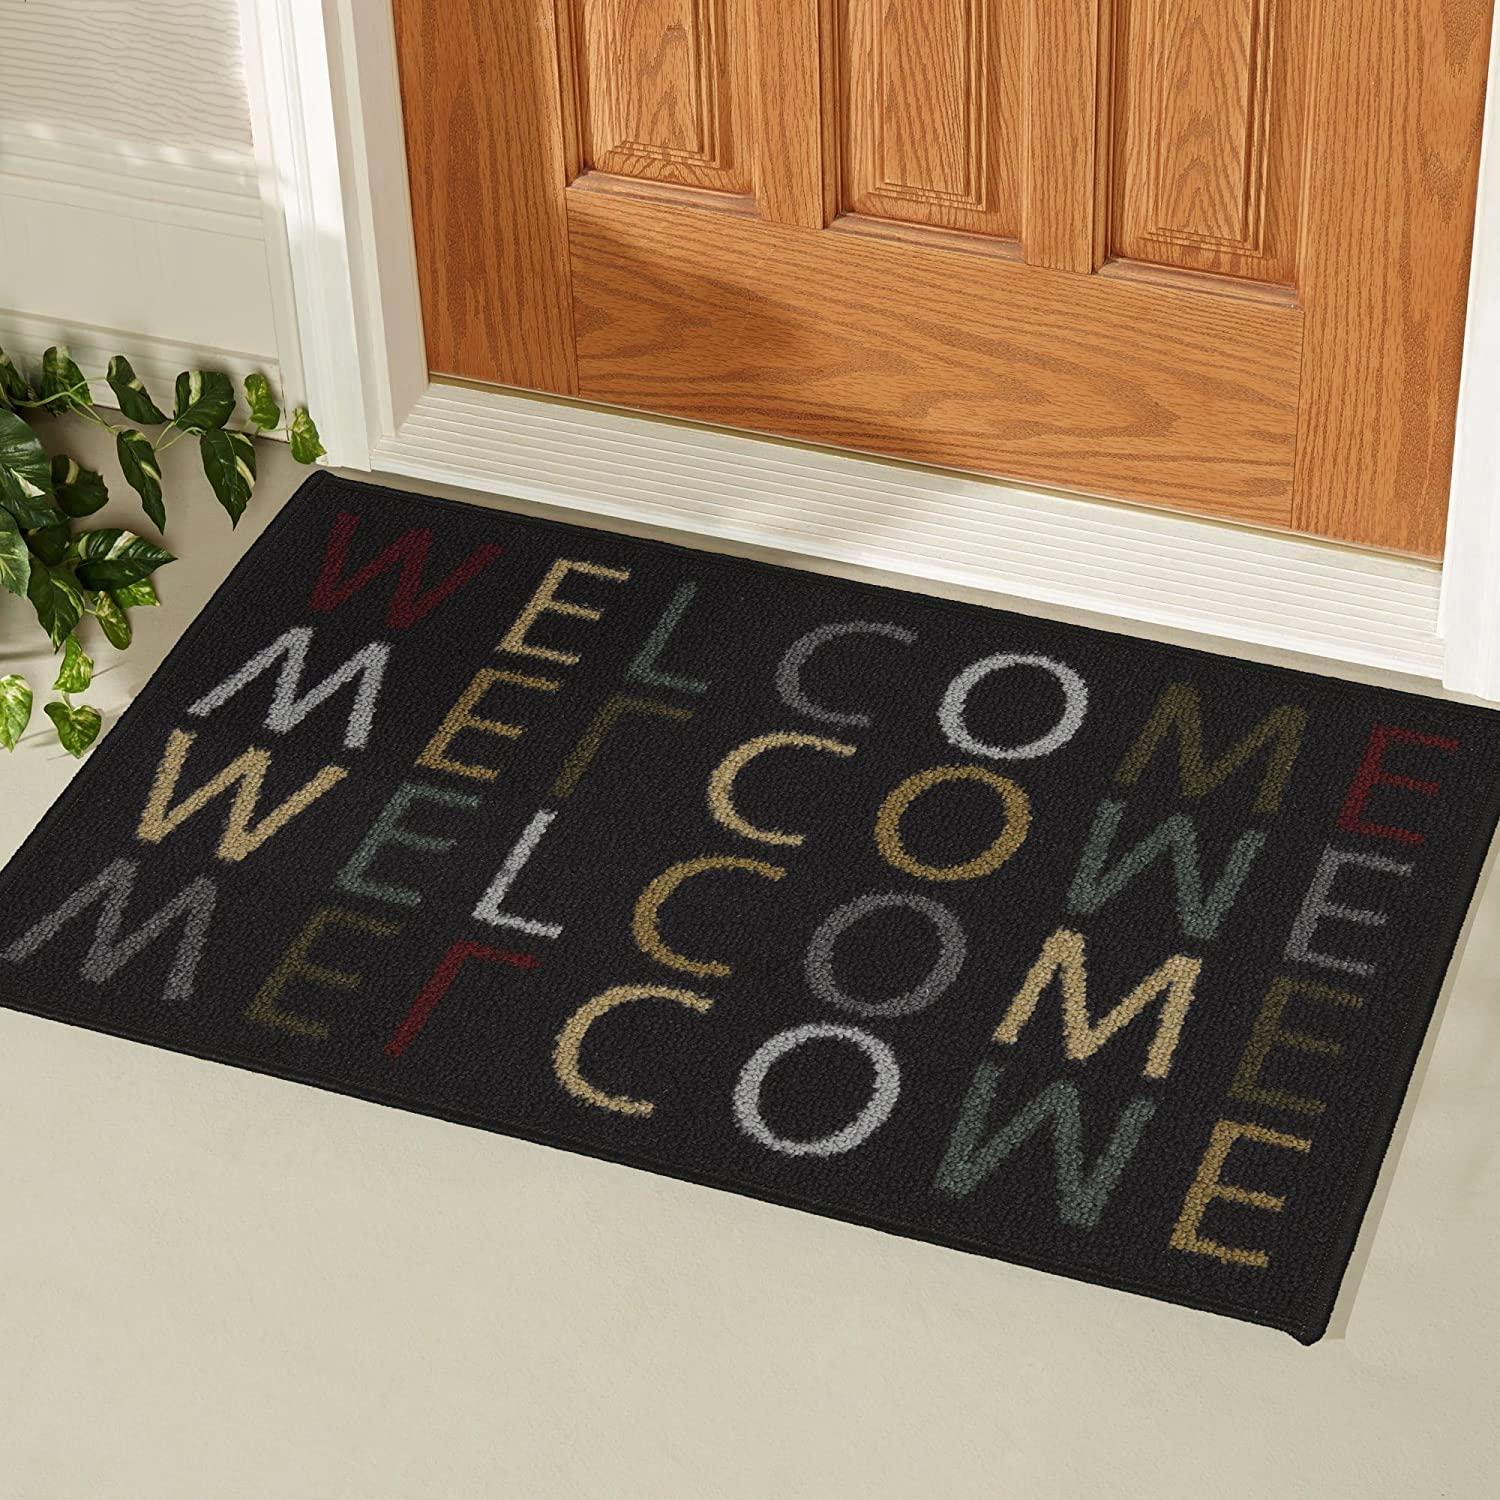 Ottomanson USA Rugs Collection Rectangular Welcome Home Doormat for $7.08